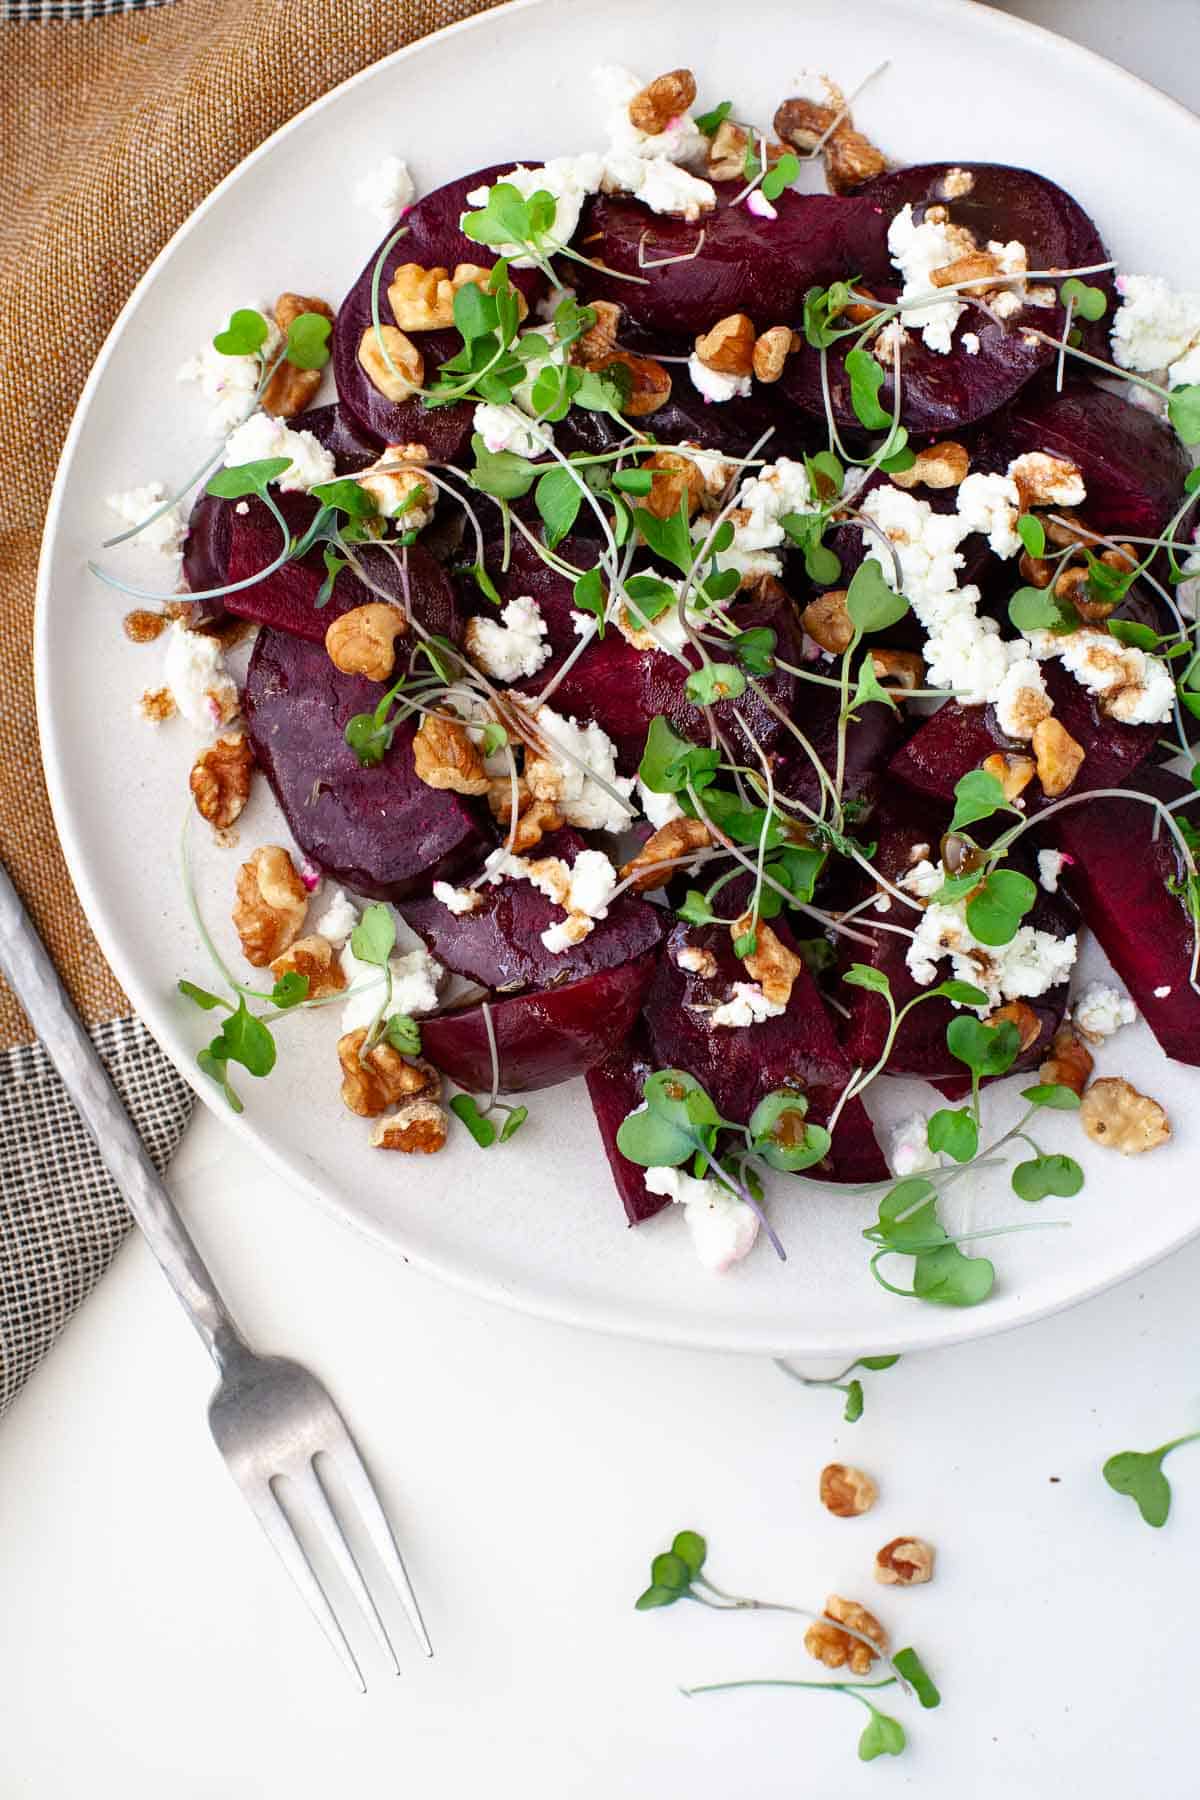 Beet salad with feta cheese on a white plate next to a kitchen towel and a small silver fork